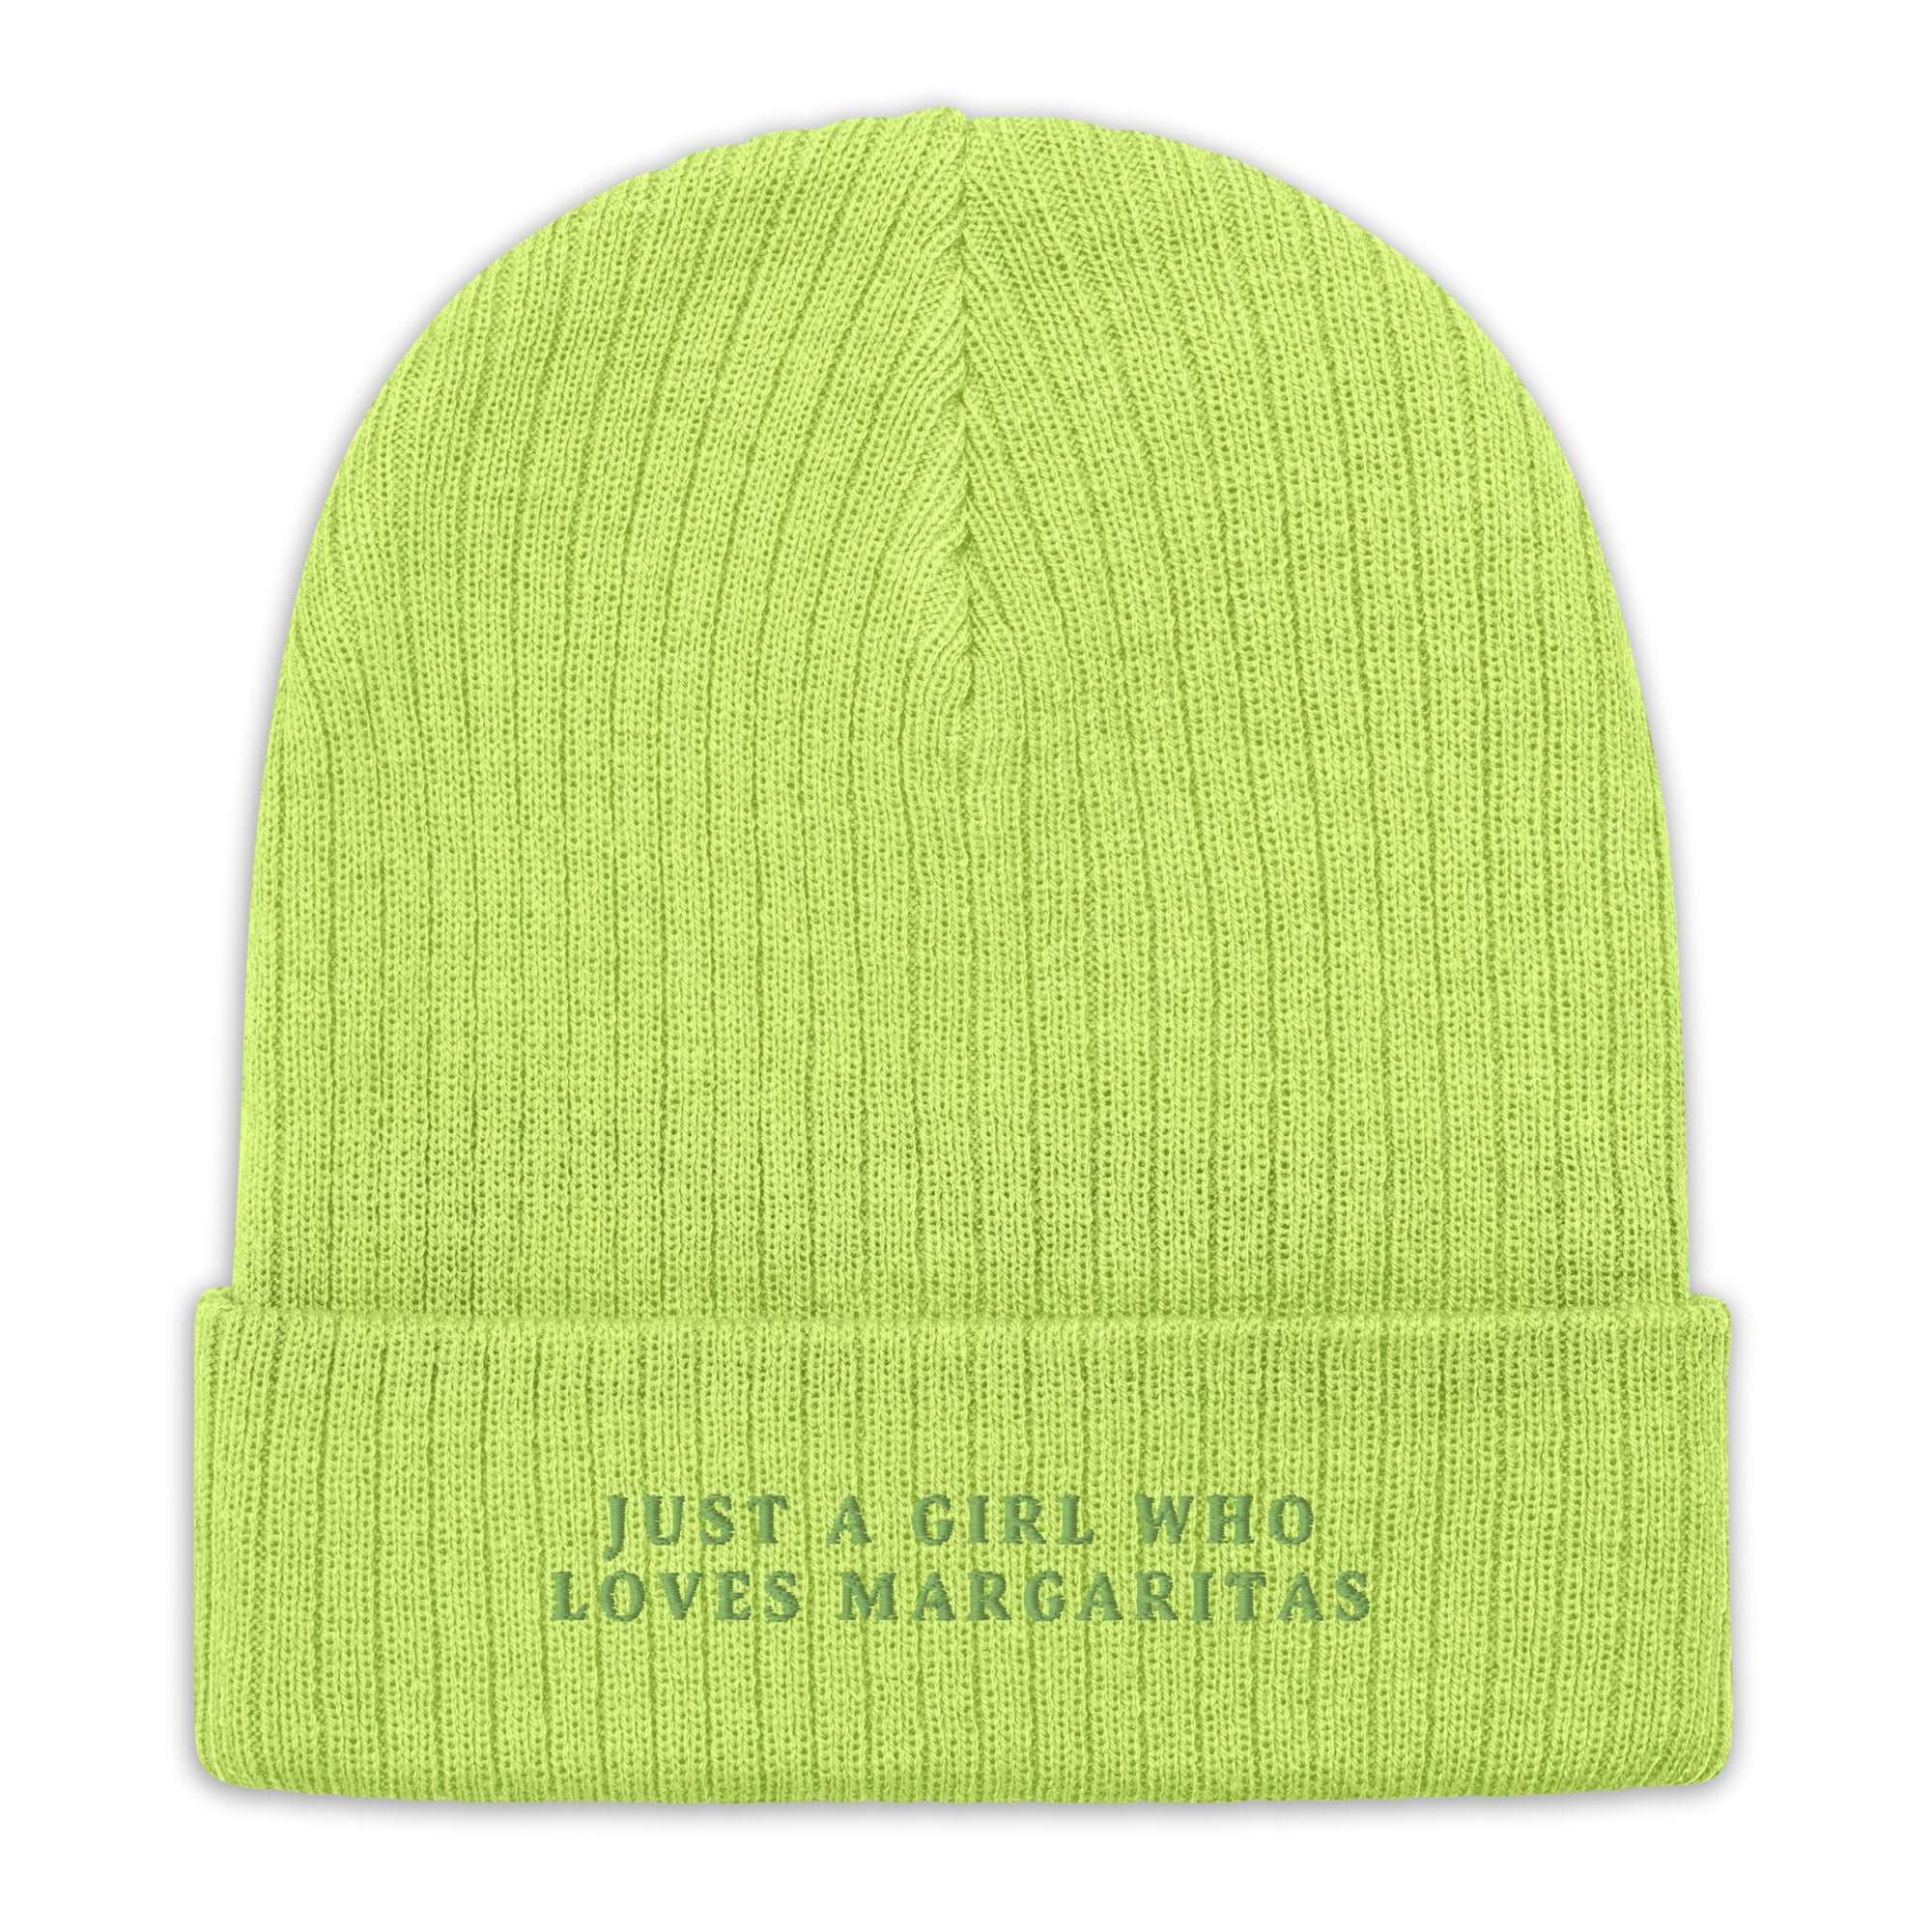 Just a Girl who loves Margaritas - Beanie - The Refined Spirit